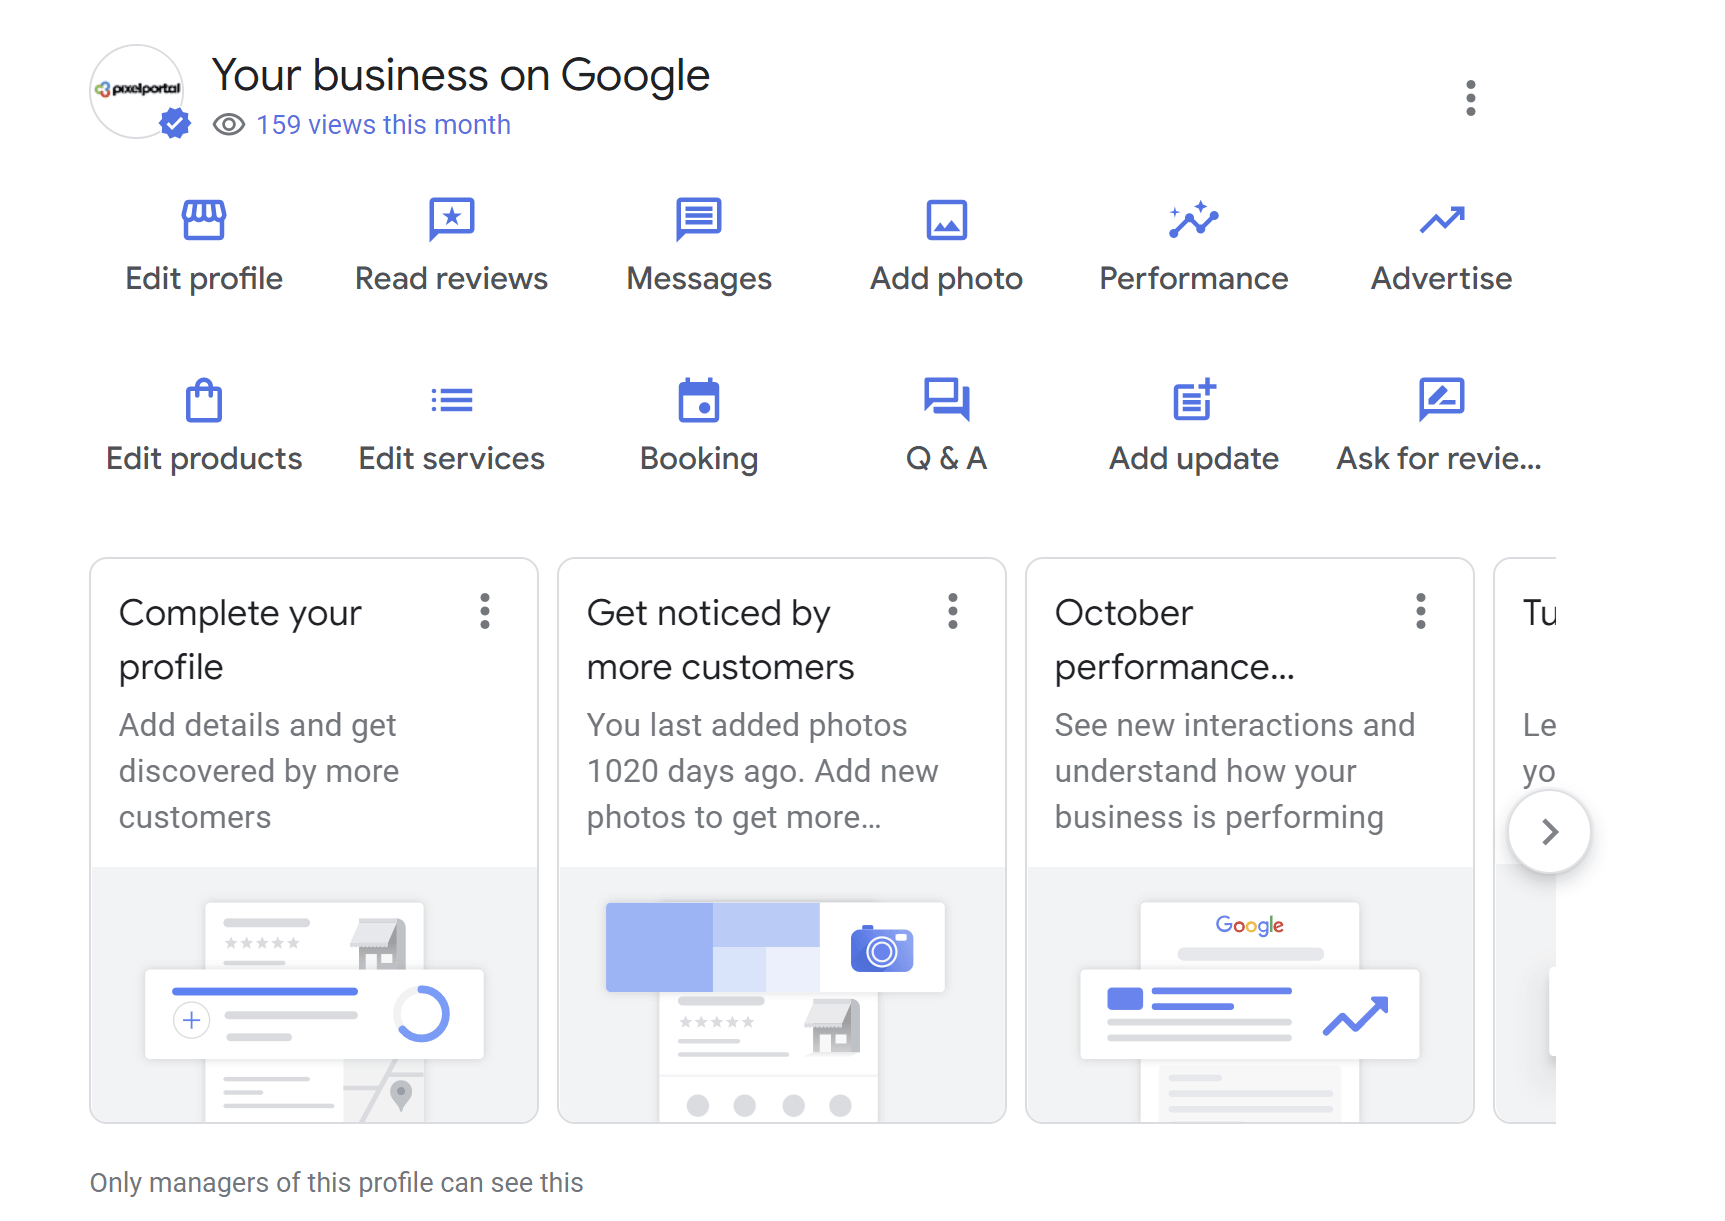 If you're logged into your Google Account, this is what you'll see if you have access to your Google Business Profile